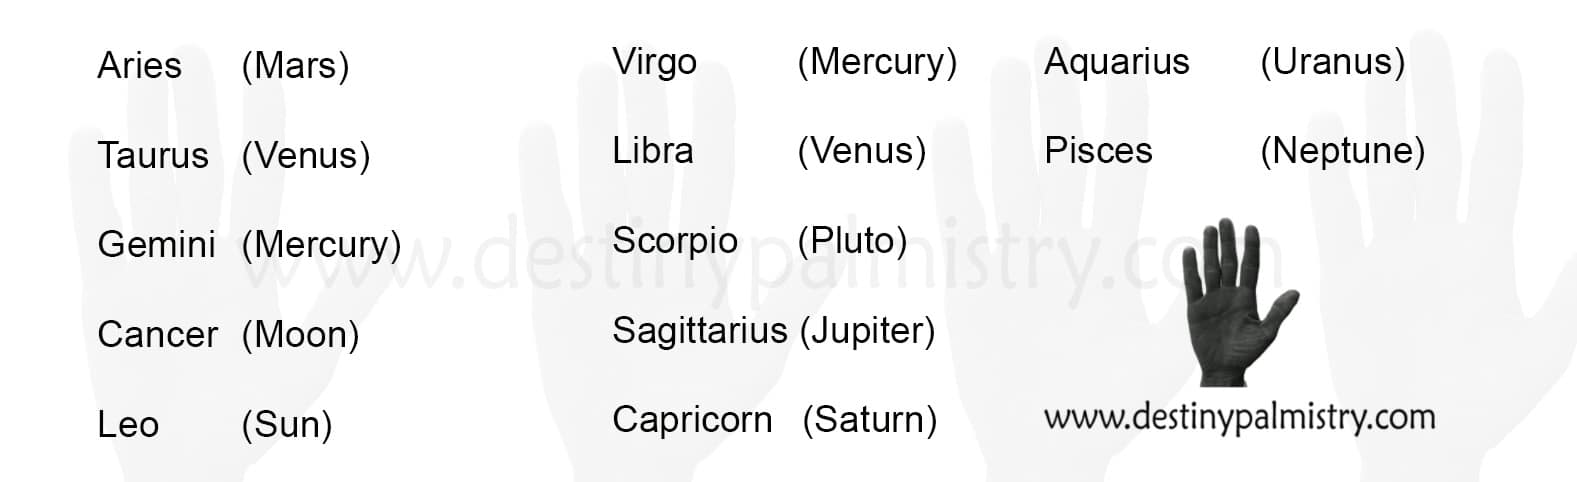 star signs and their planets, by sari puhakka, destiny palmistry, astrology and tarot